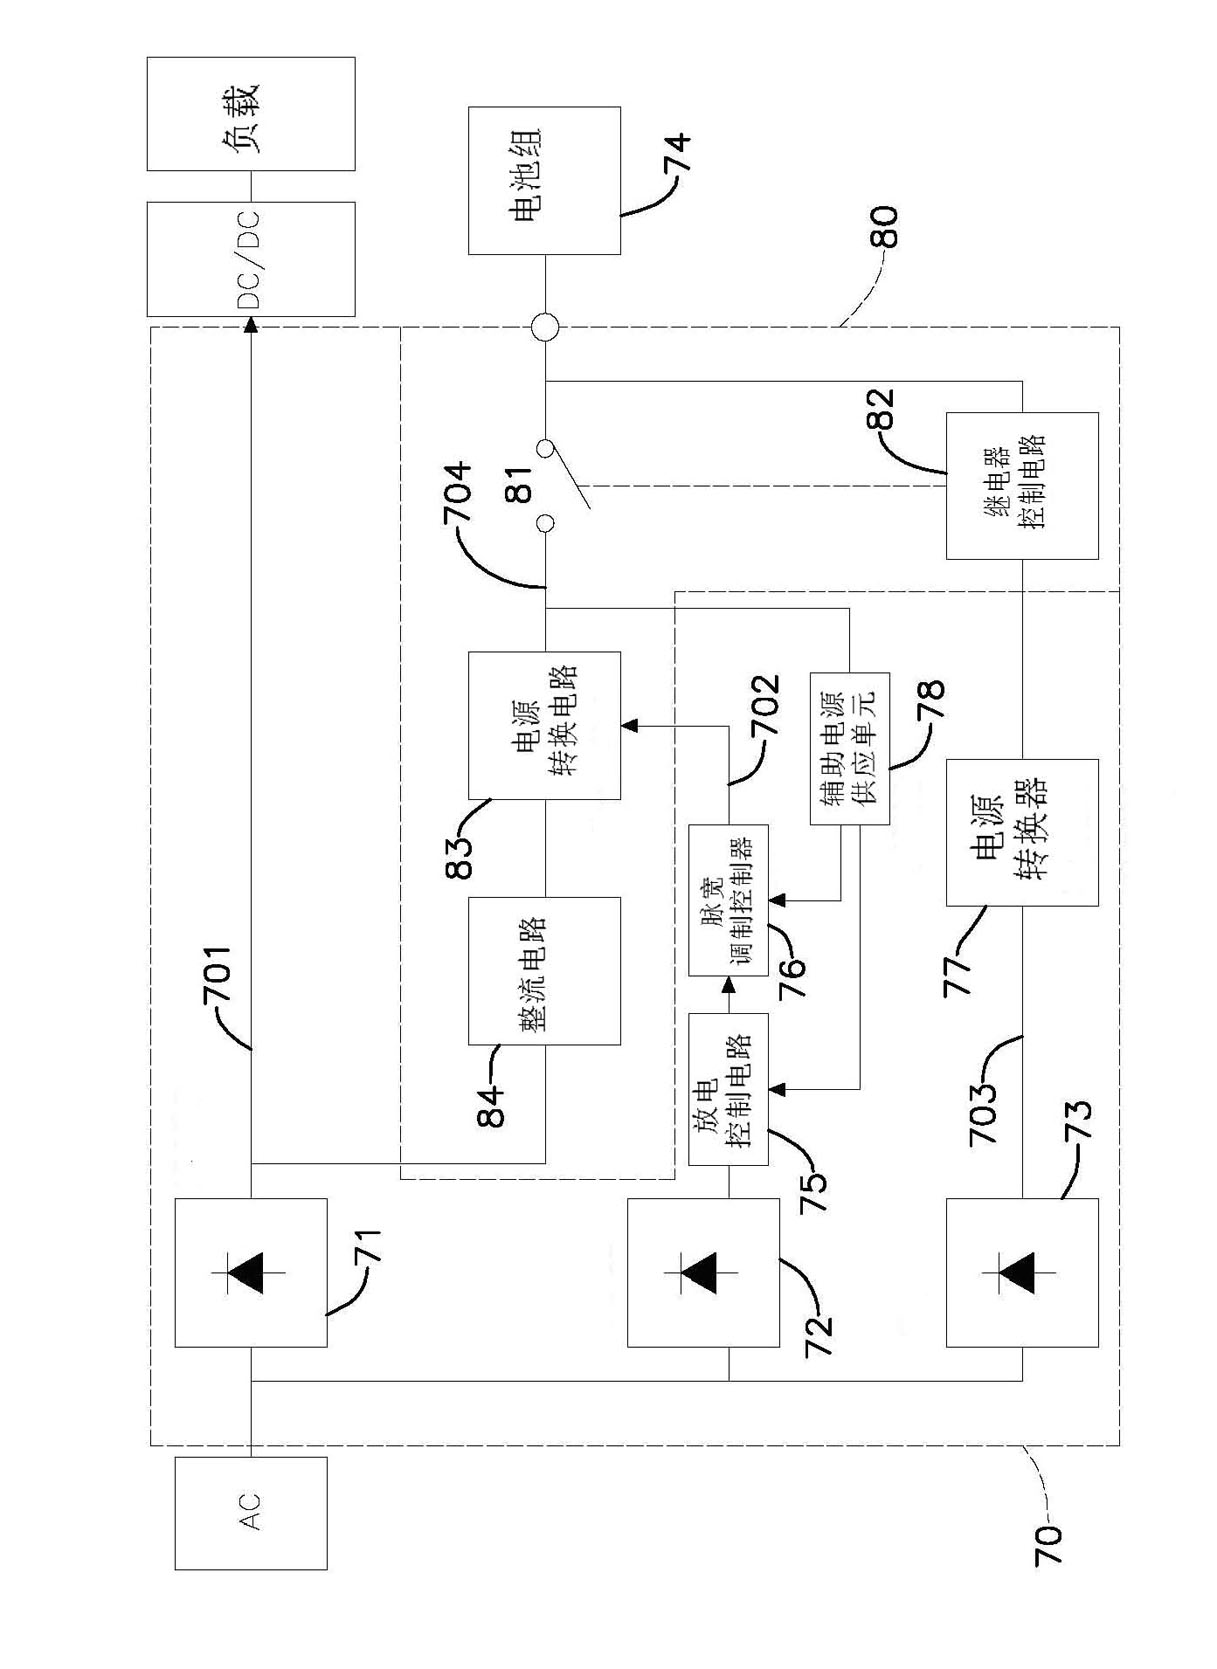 Direct-current output uninterrupted power supply